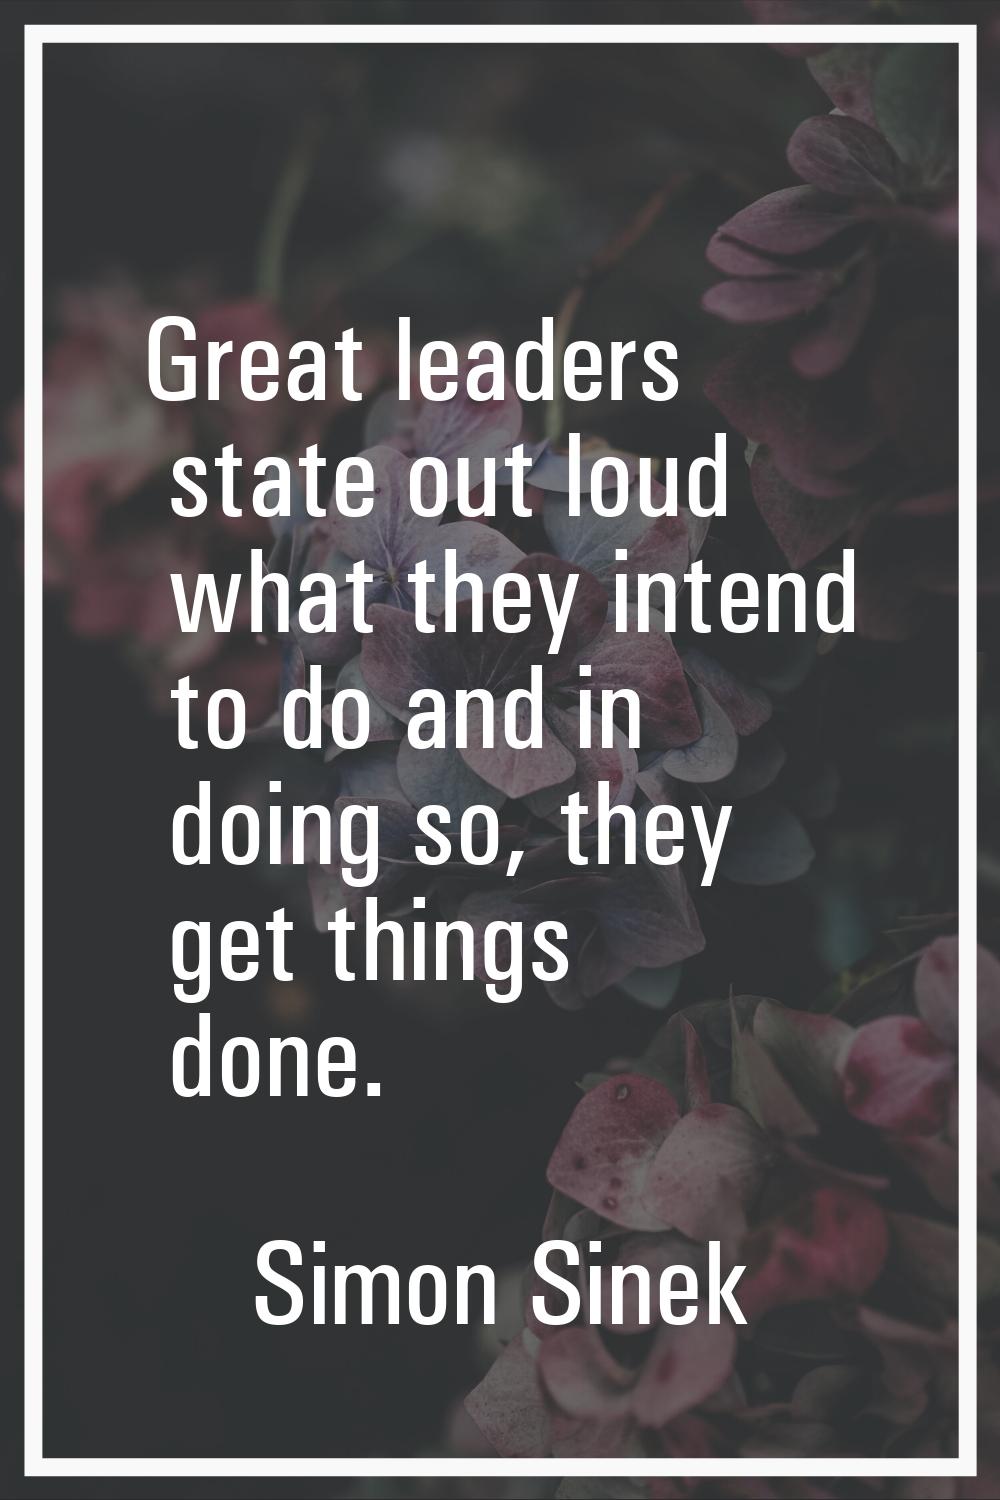 Great leaders state out loud what they intend to do and in doing so, they get things done.